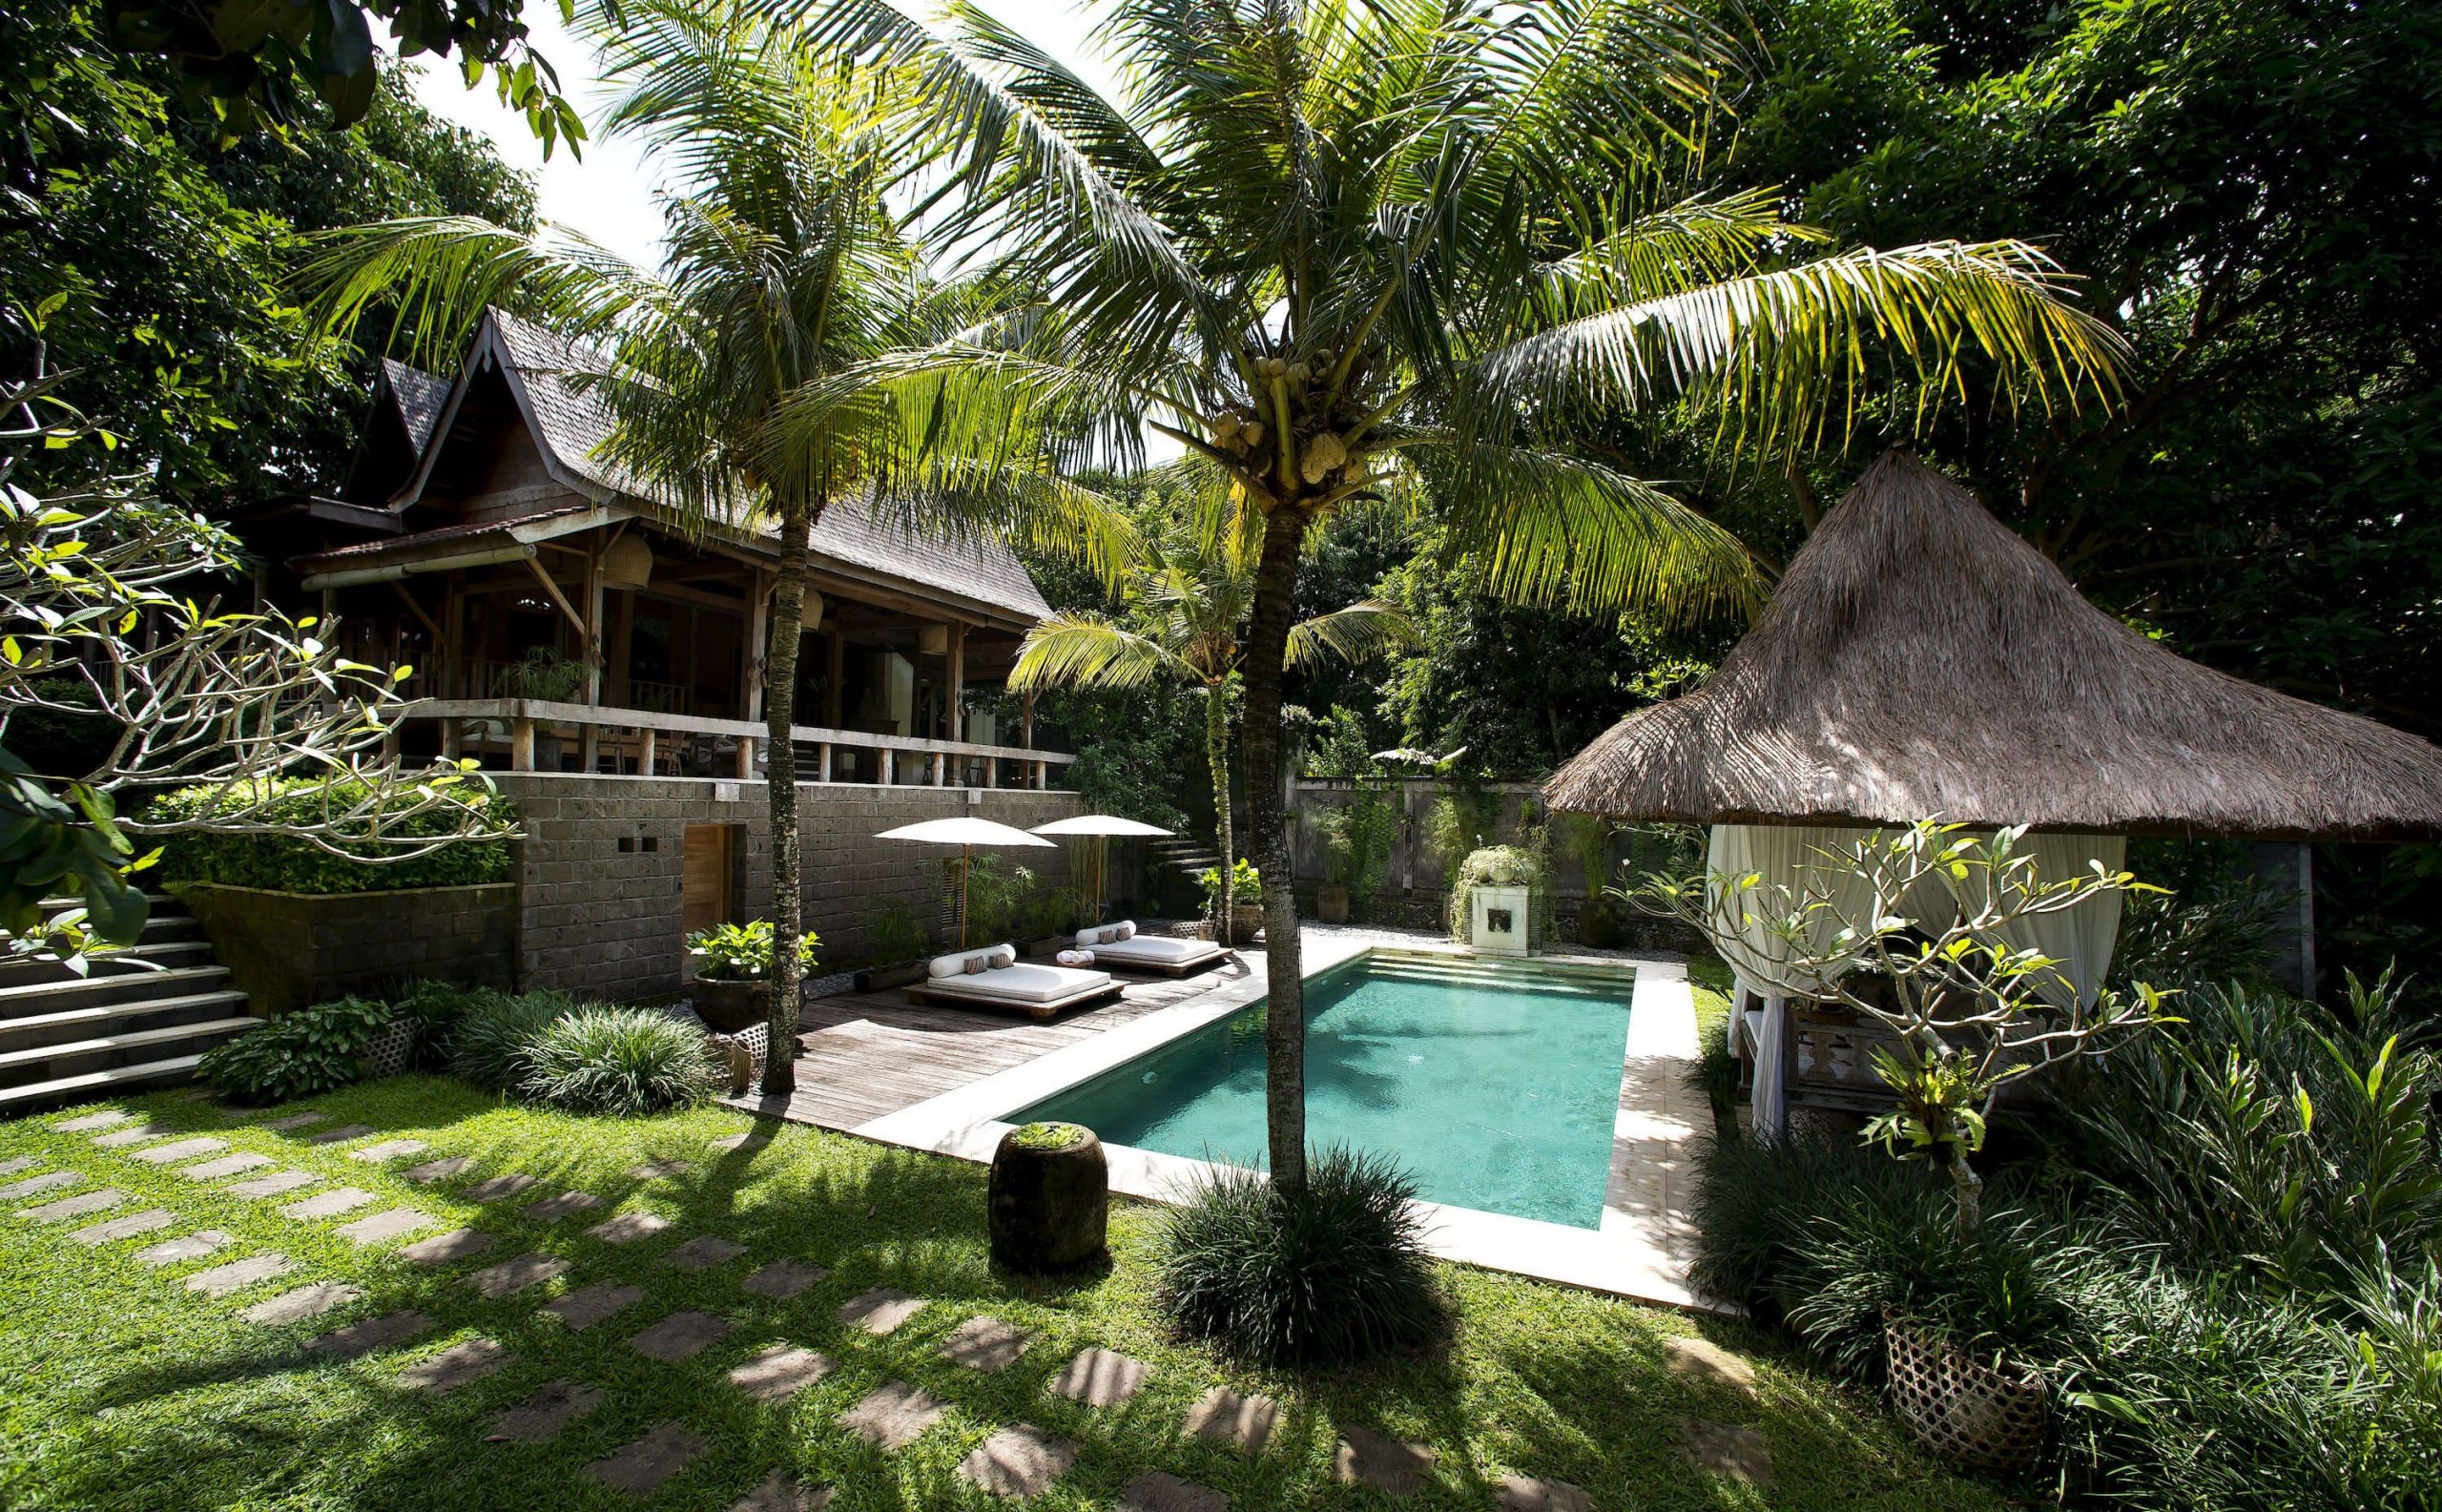 The outdoor pool and lounge area on a sunny day at the Kalapa Boutique Resort & Yoga Retreat in Bali.